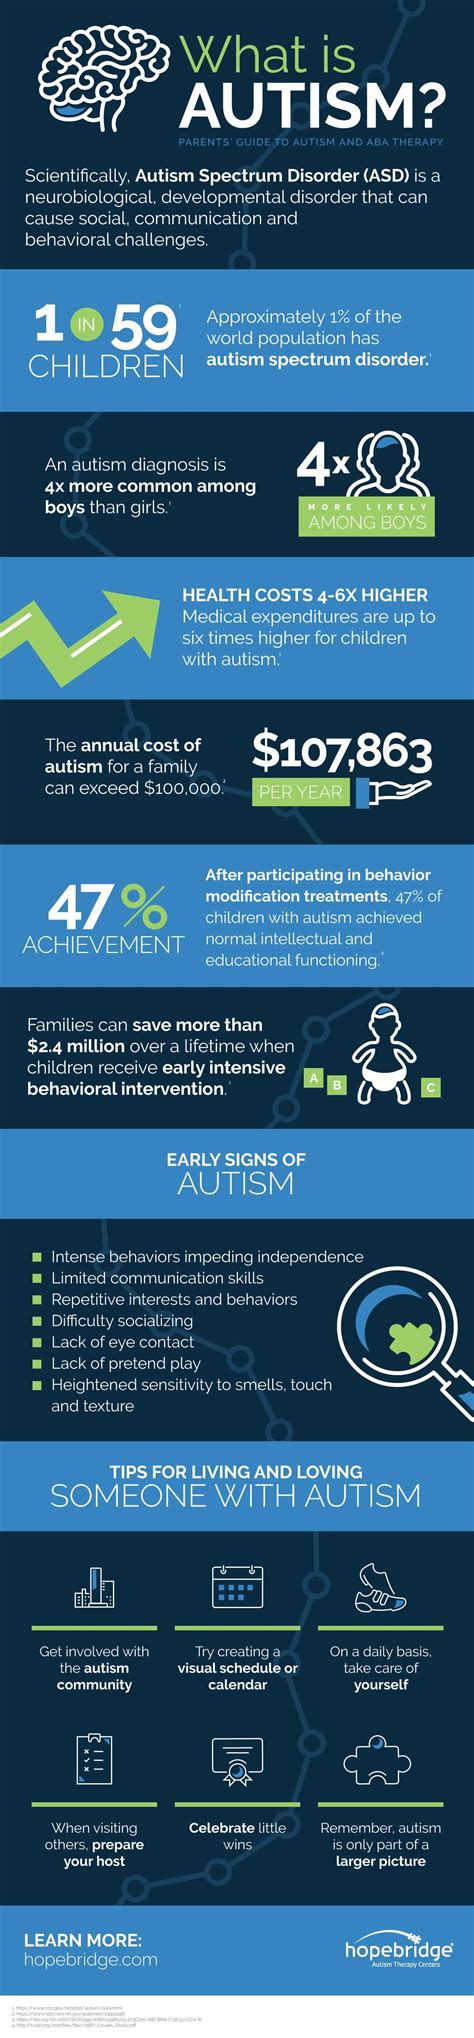 What The Increased Prevalence Of Autism In Children Means For You